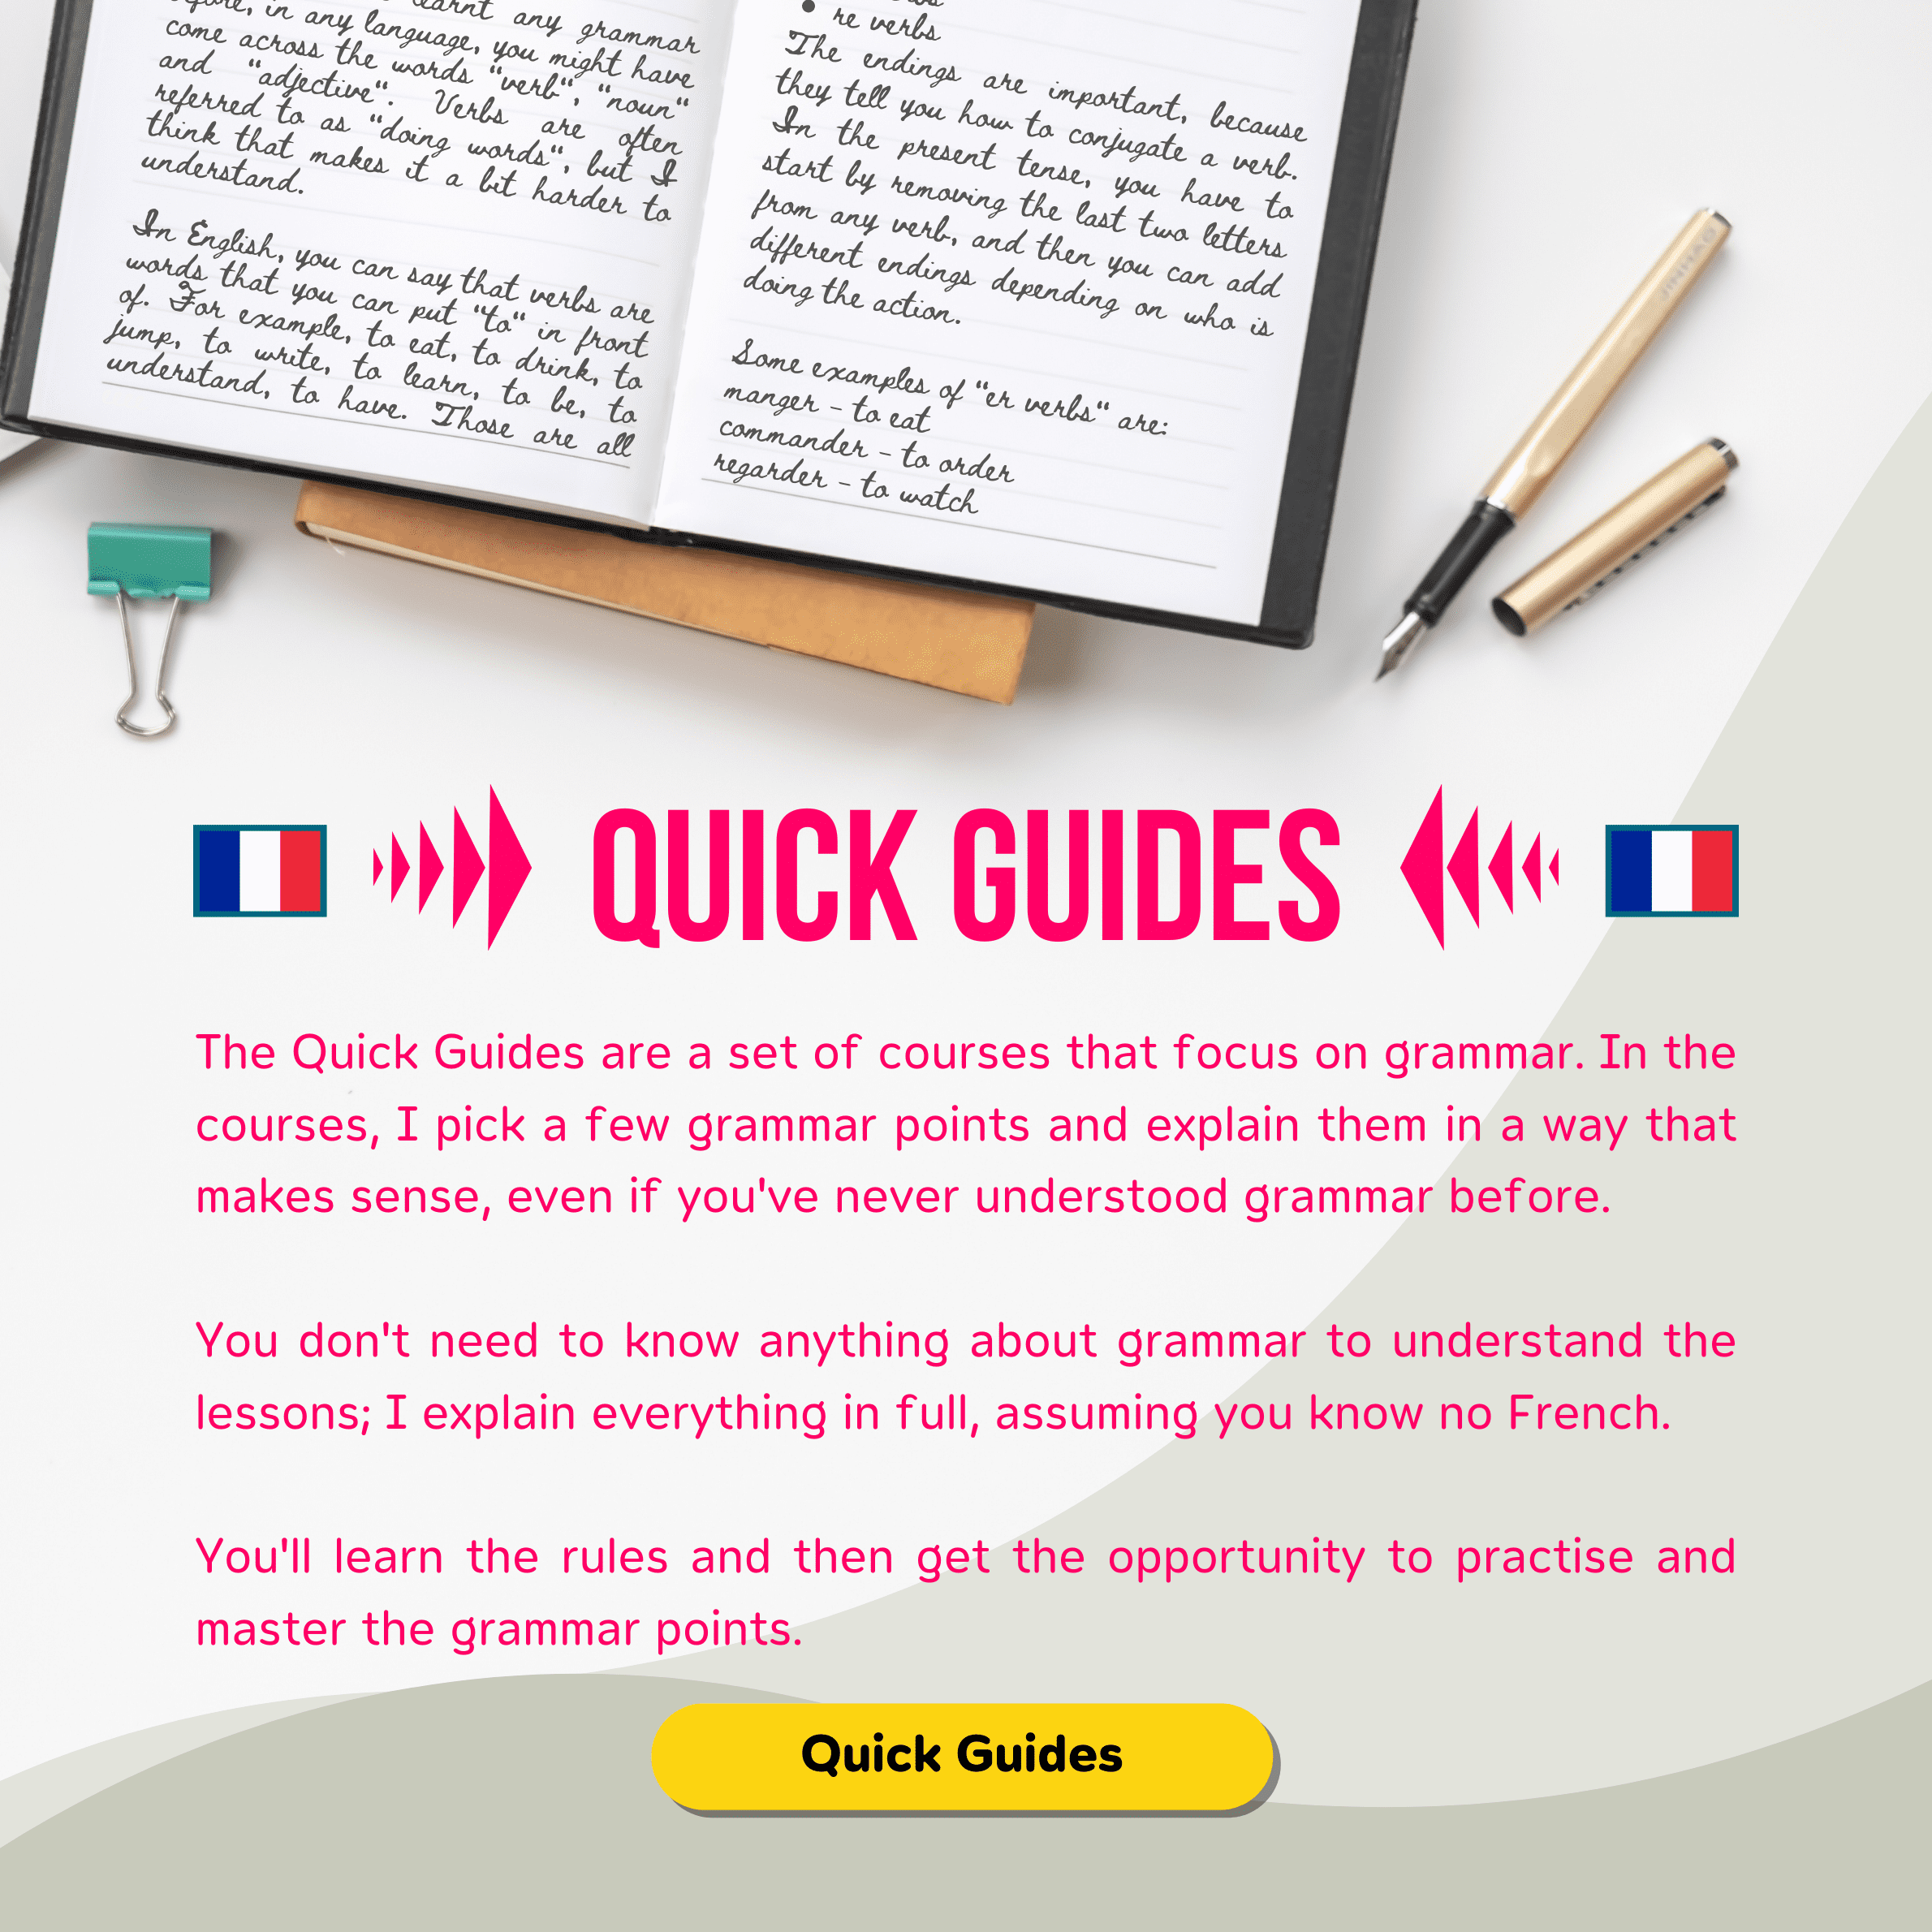 Quick Guides in French